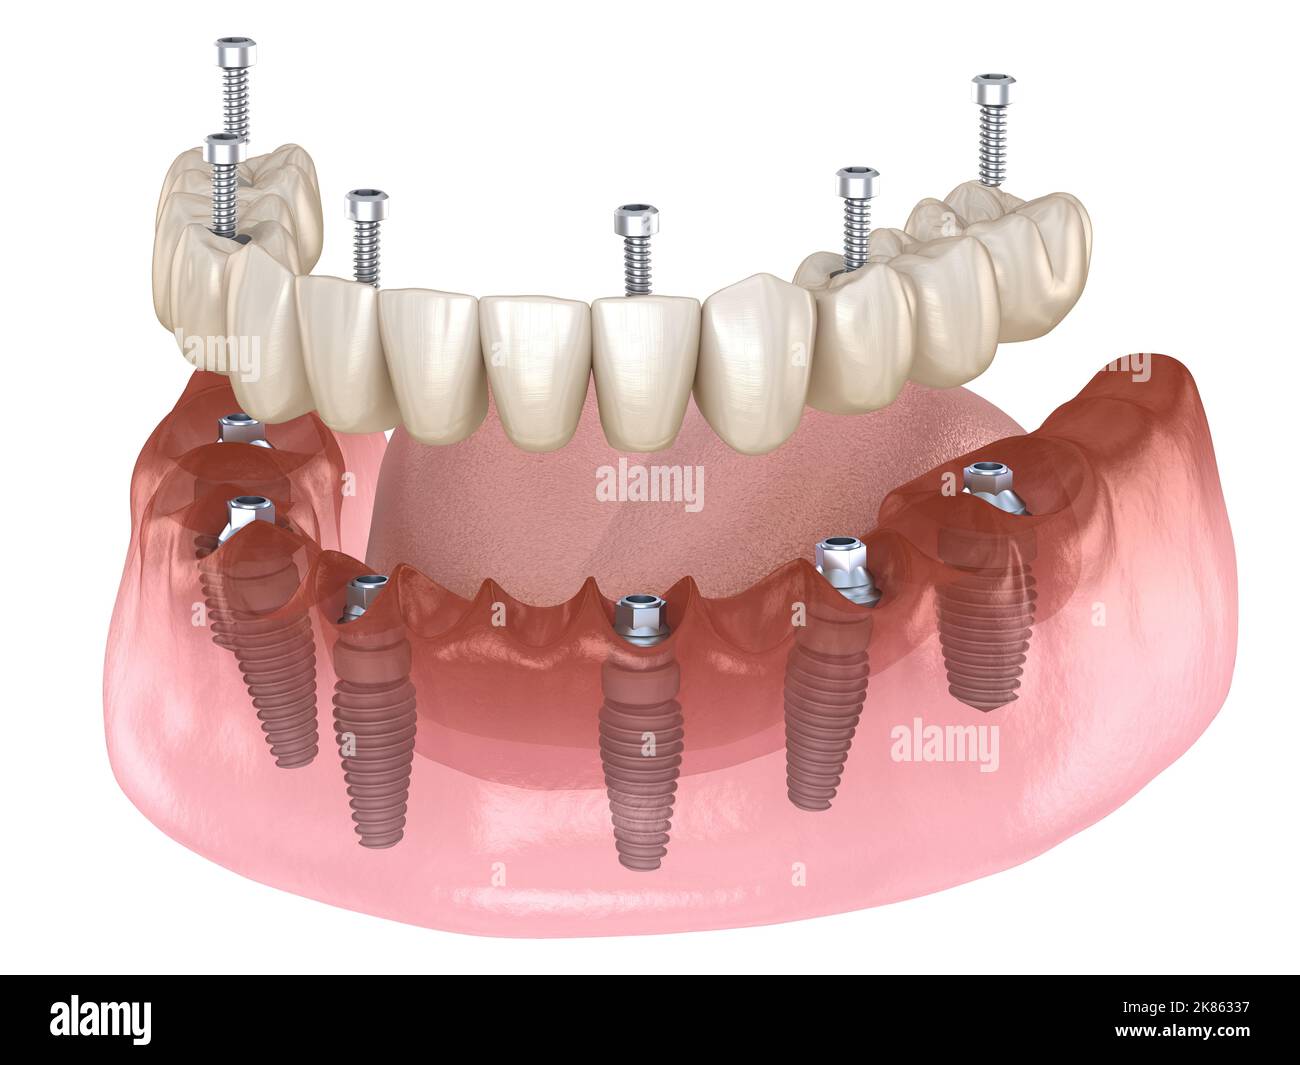 Mandibular prosthesis All on 4 system supported by implants, screw fixation. Medically accurate 3D illustration of dental concept Stock Photo